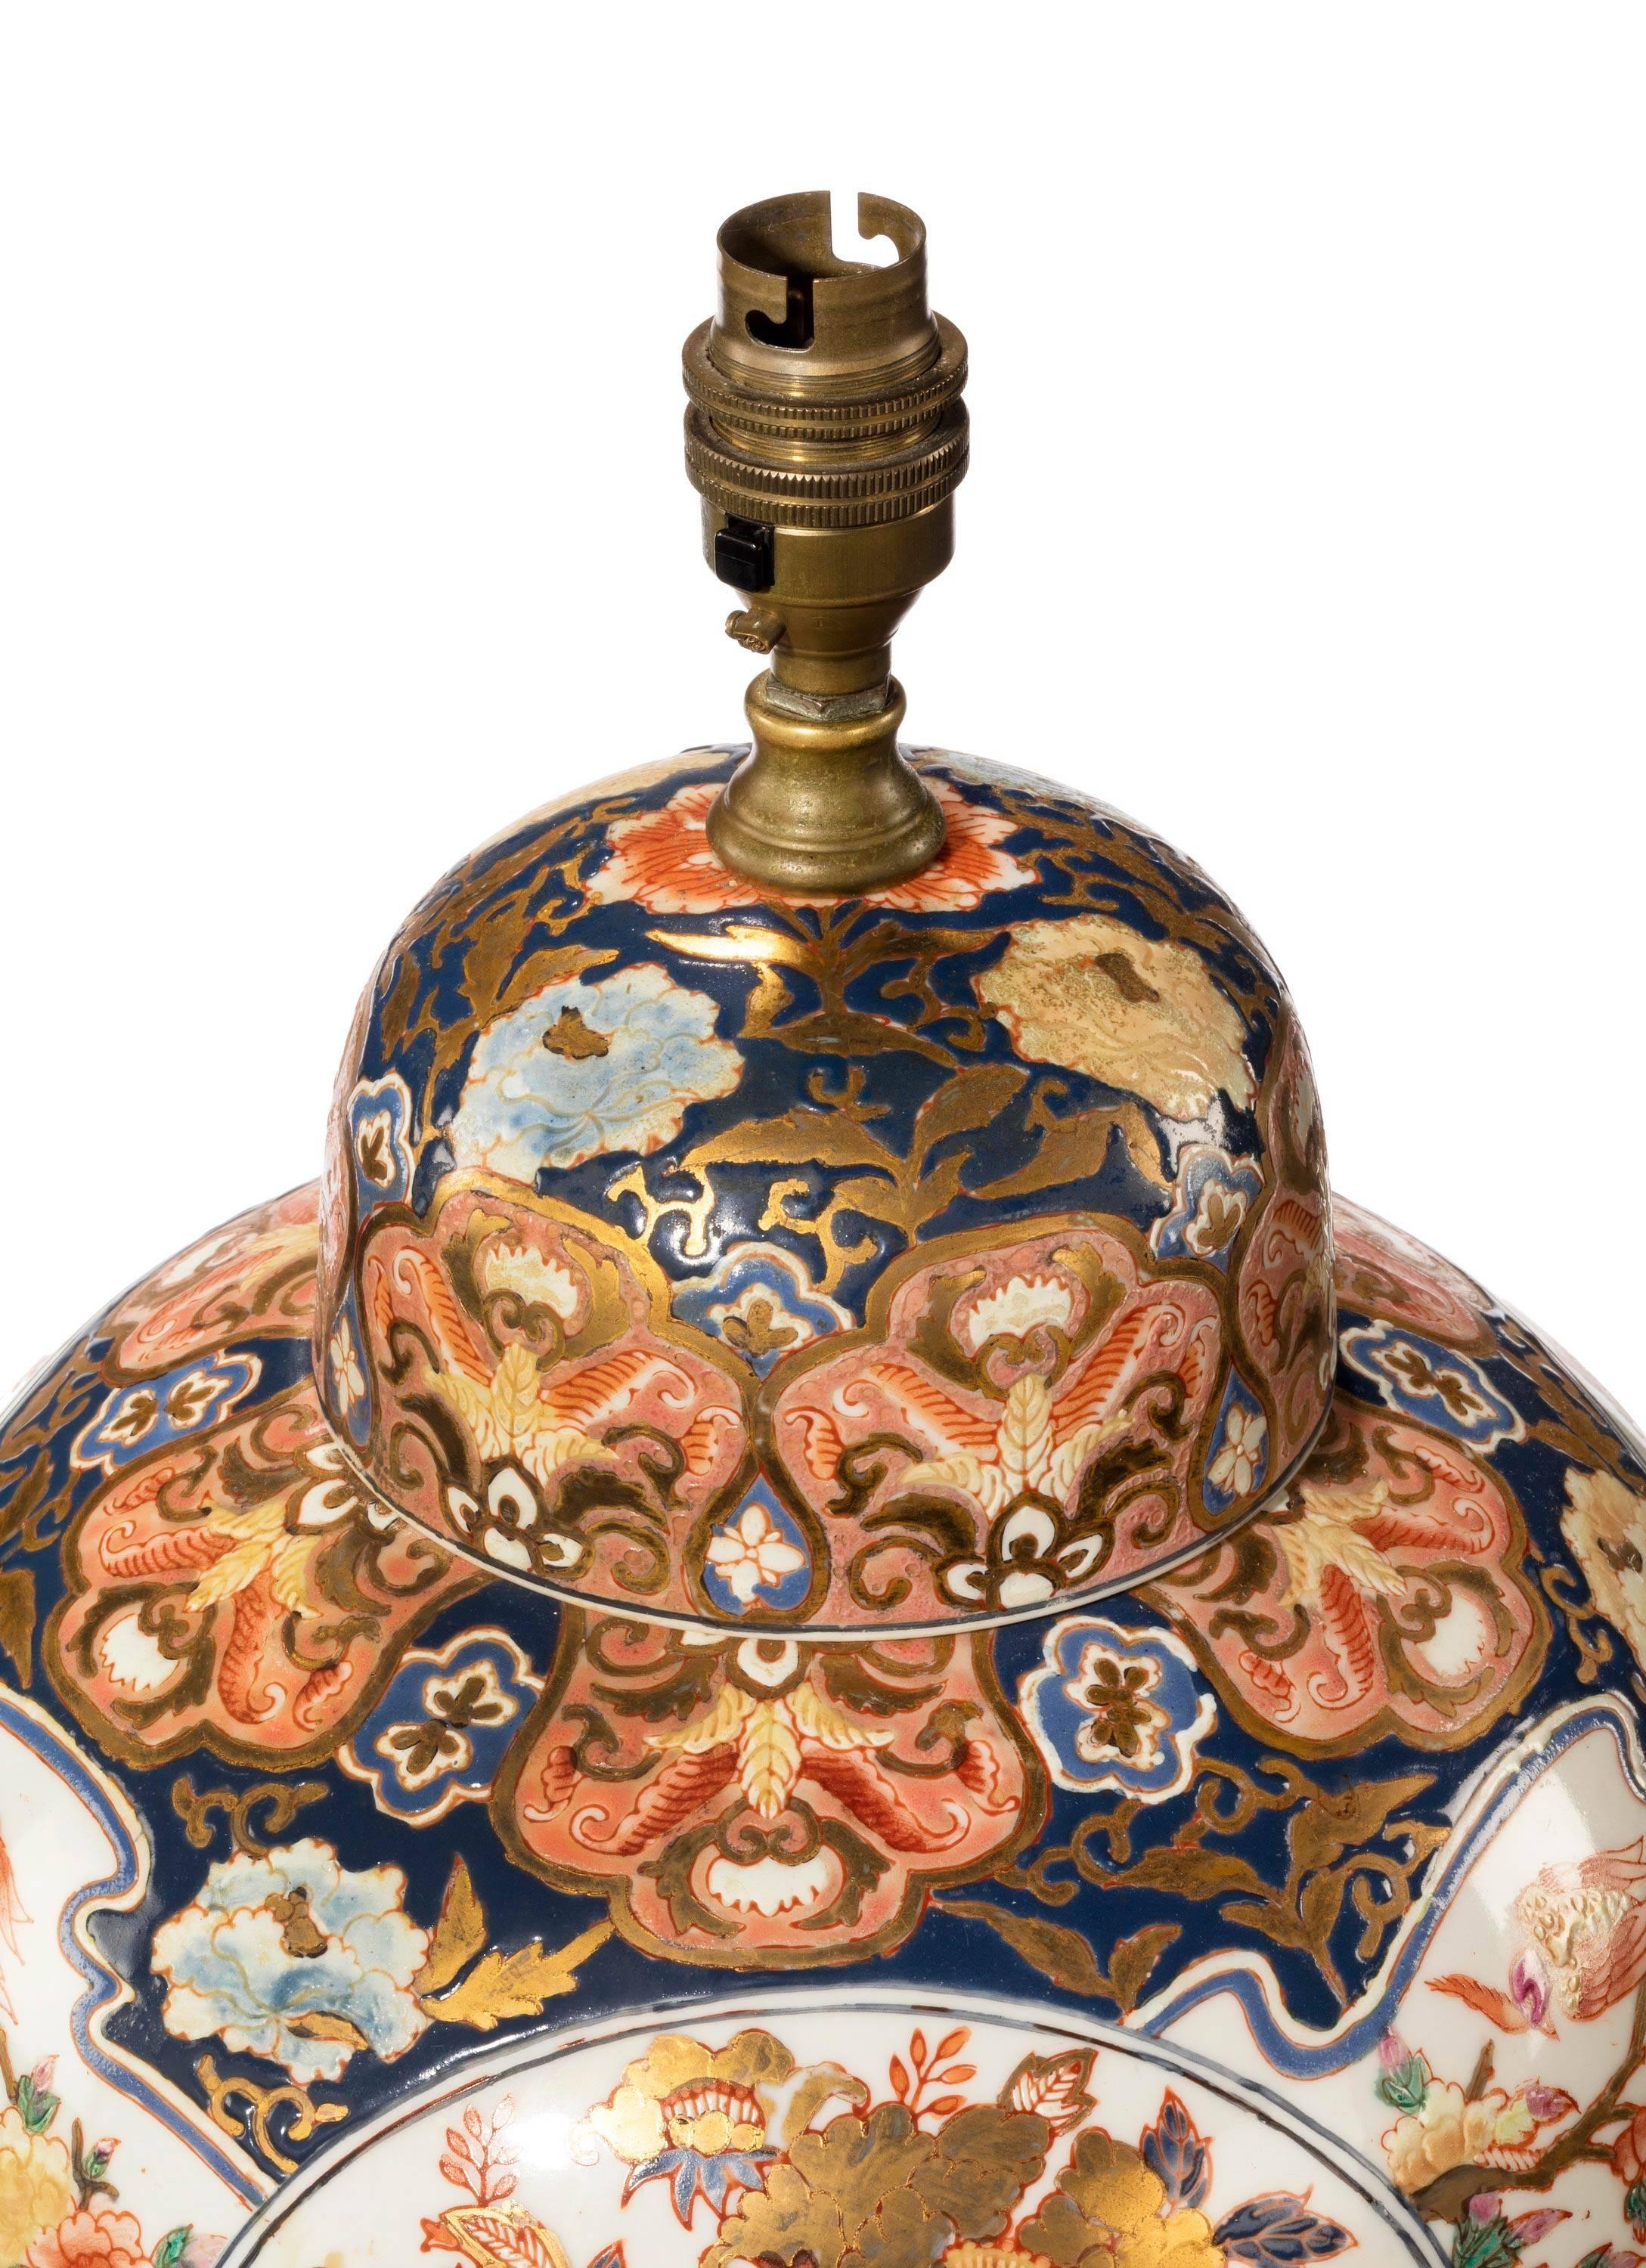 Chinese Early 20th Century Imari Porcelain Vase Lamp with a Shaped Top